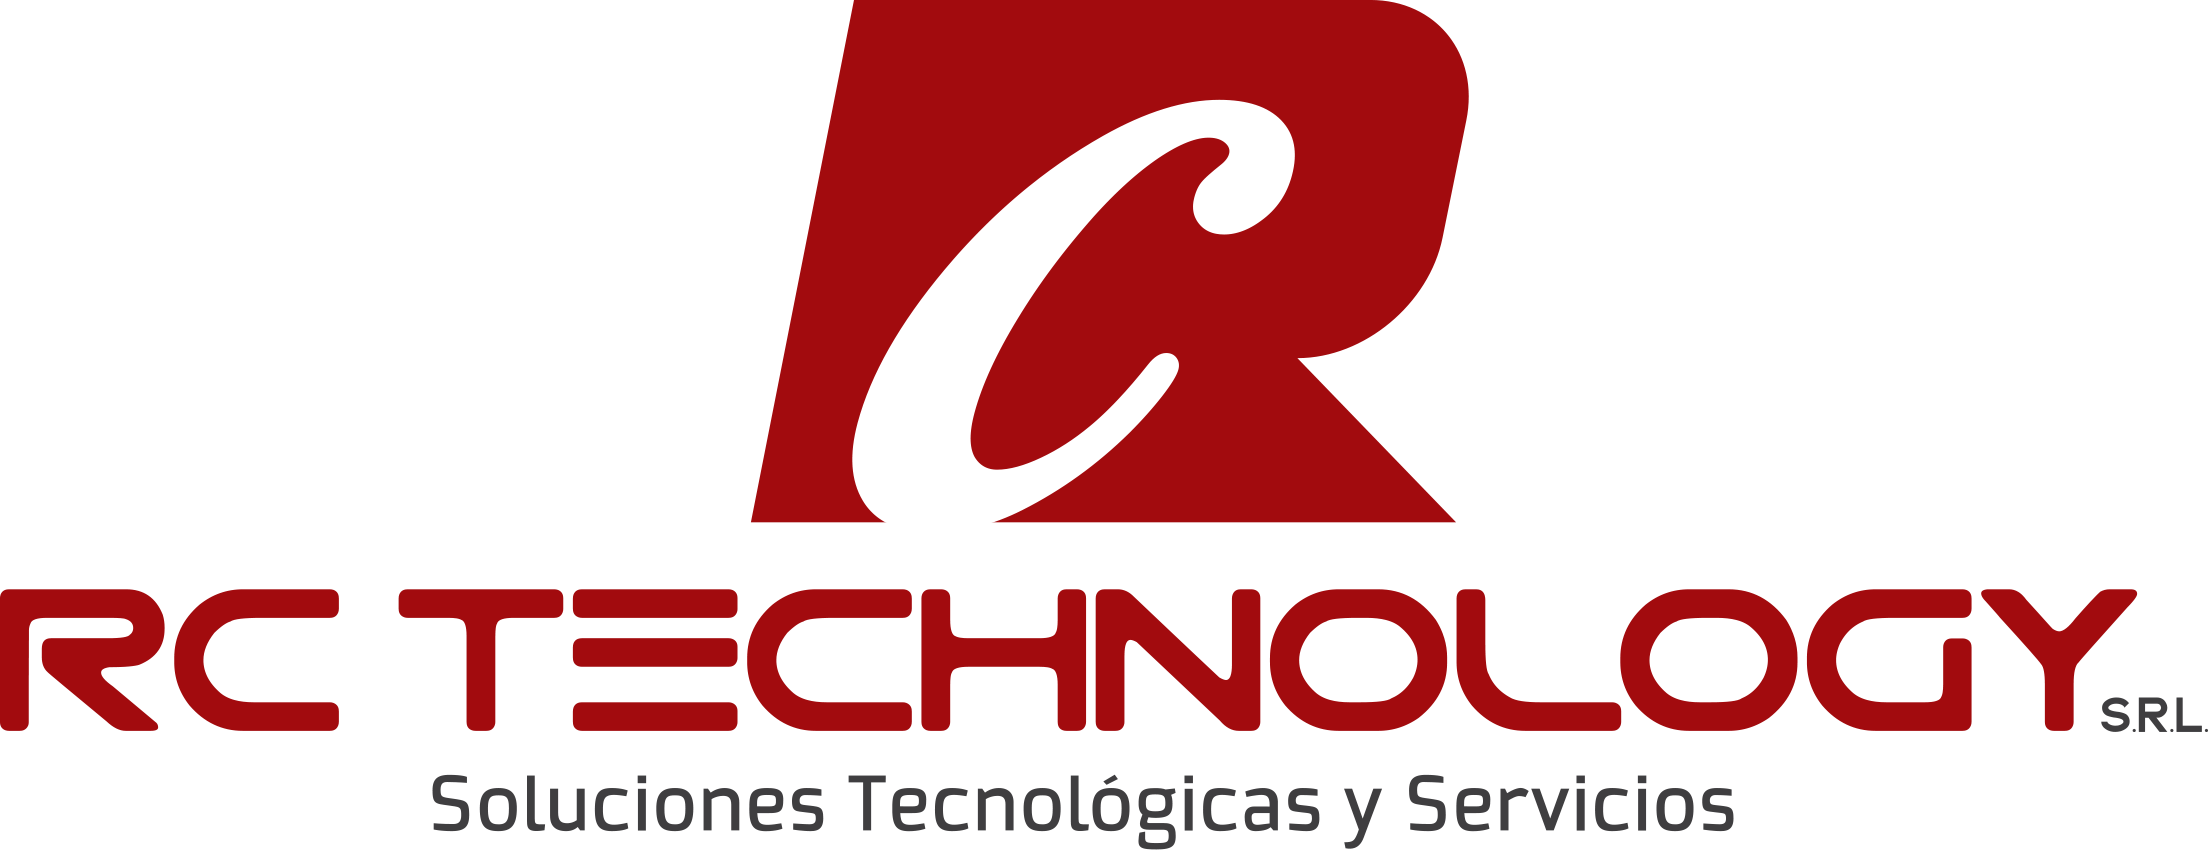 Rc Technology, Srl - Technology (2208x851), Png Download